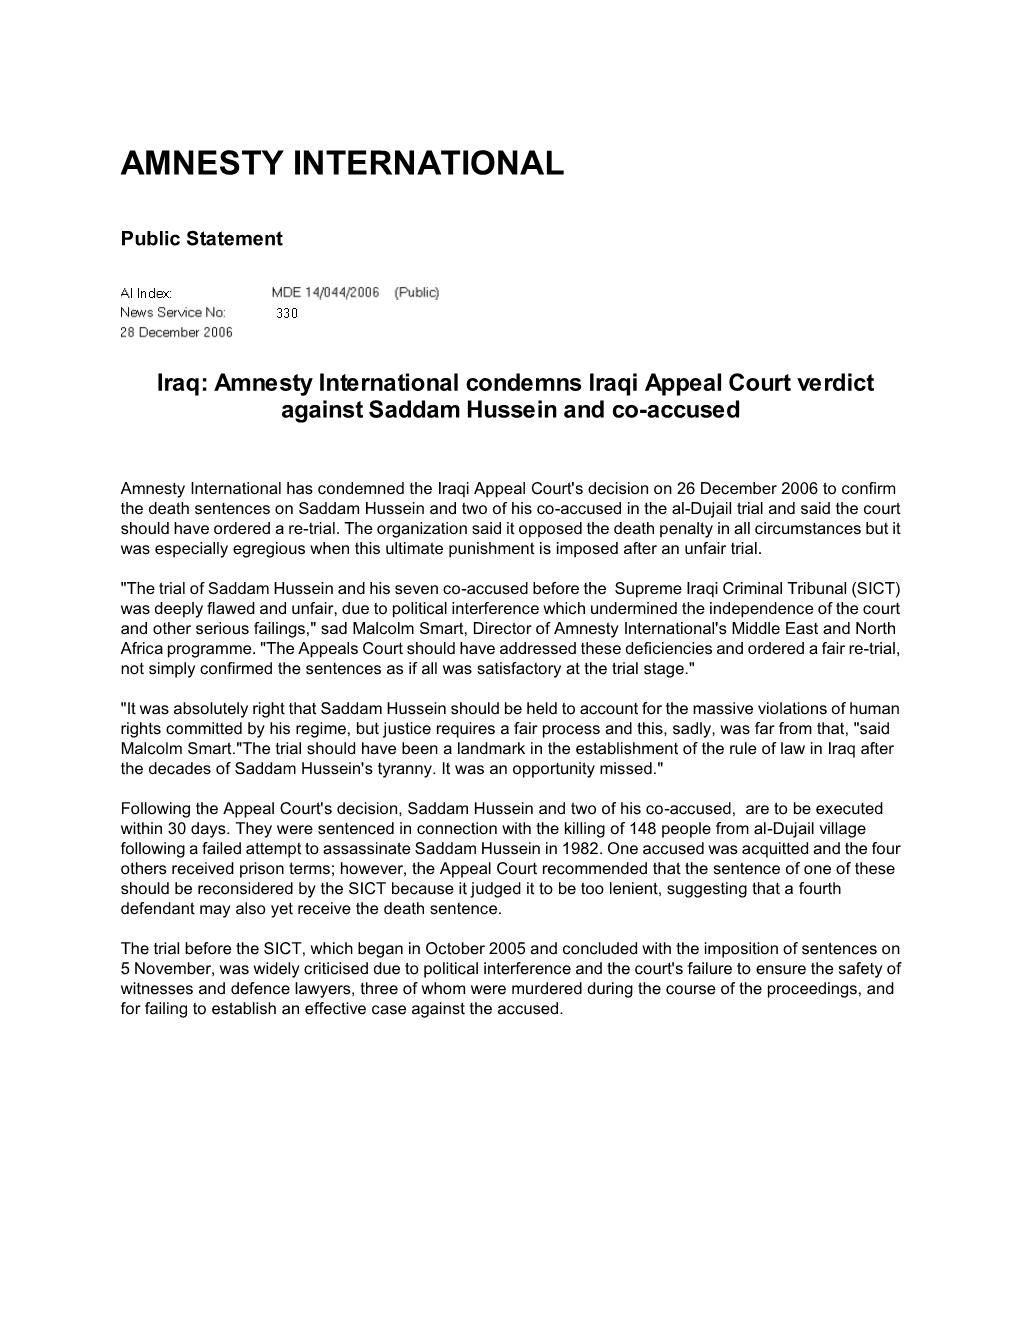 Iraq: Amnesty International Condemns Iraqi Appeal Court Verdict Against Saddam Hussein and Co-Accused